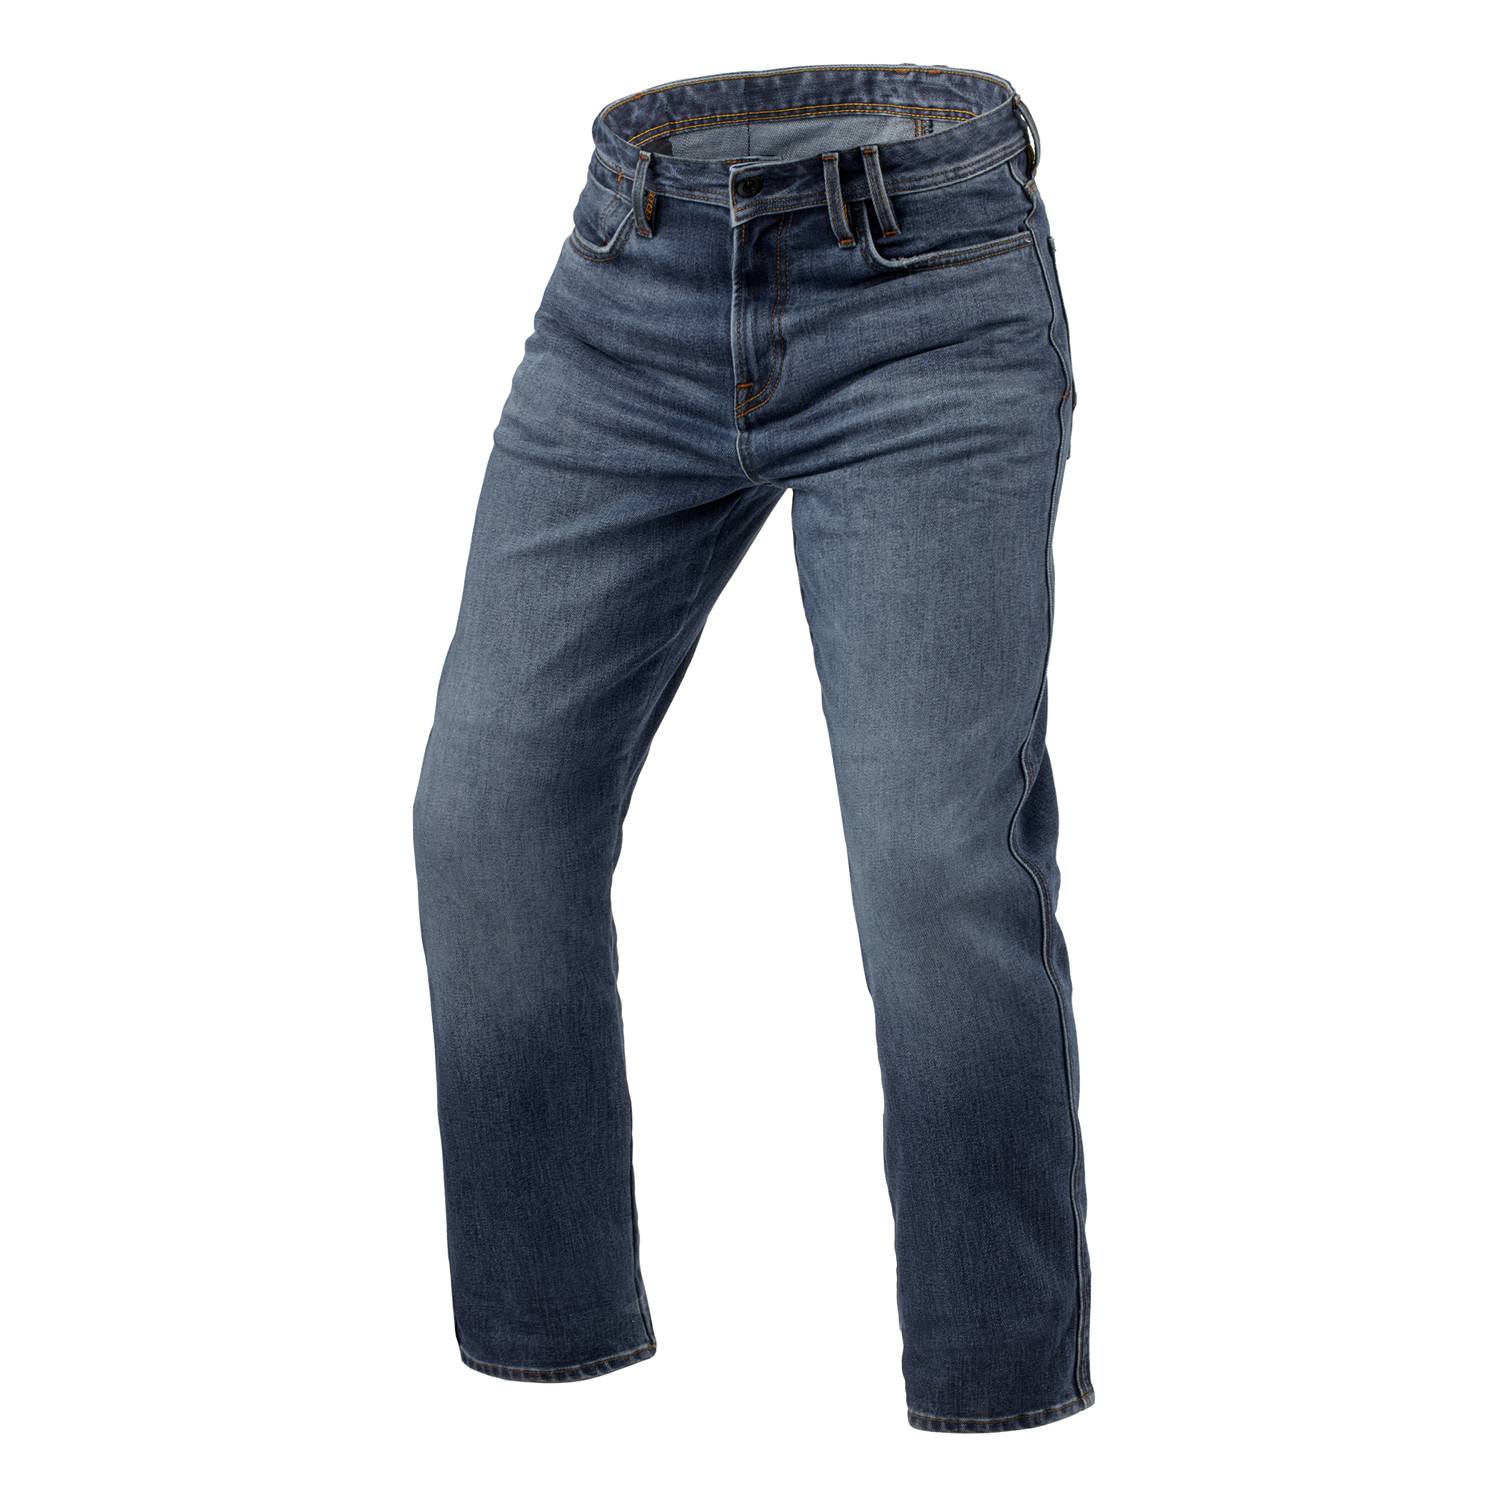 Image of REV'IT! Jeans Lombard 3 RF Mid Blue Stone L32 Motorcycle Jeans Taille L32/W28